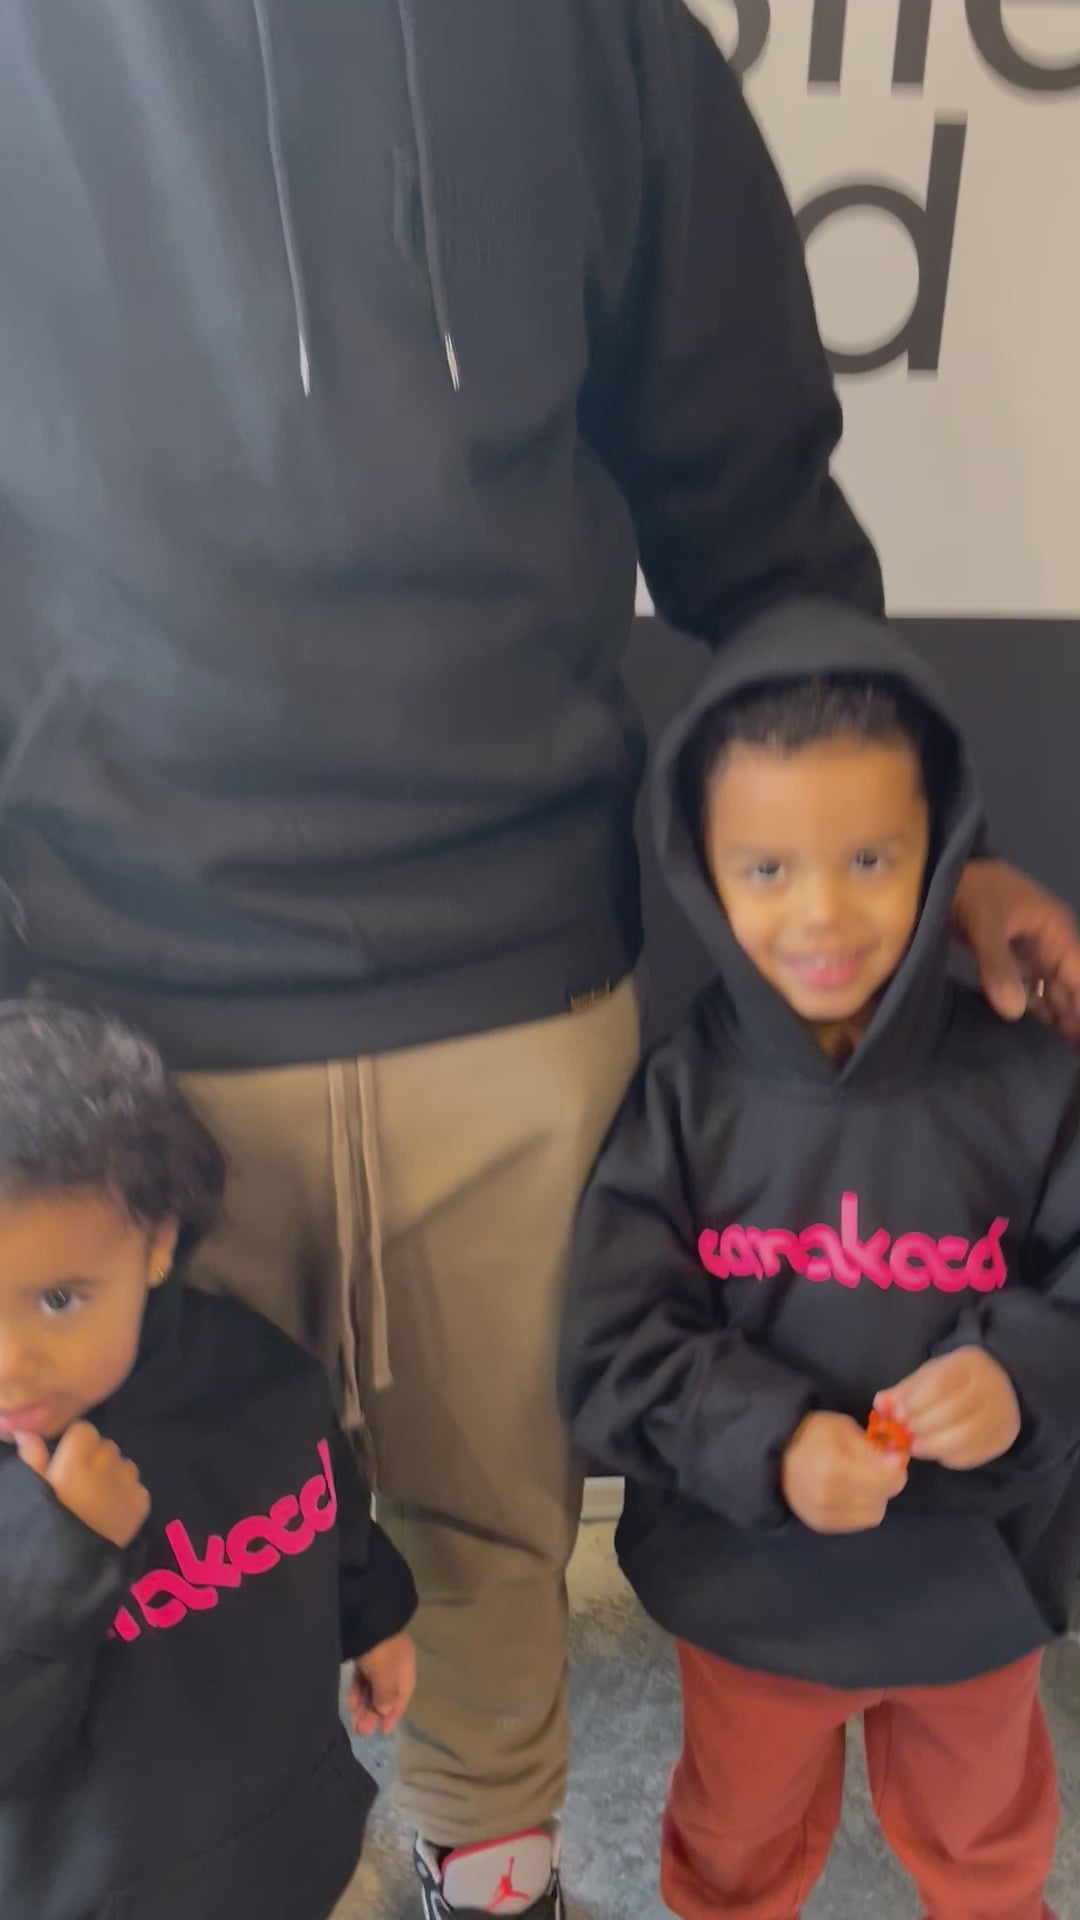 Kamakacci Family! Hoodies for the whole family!